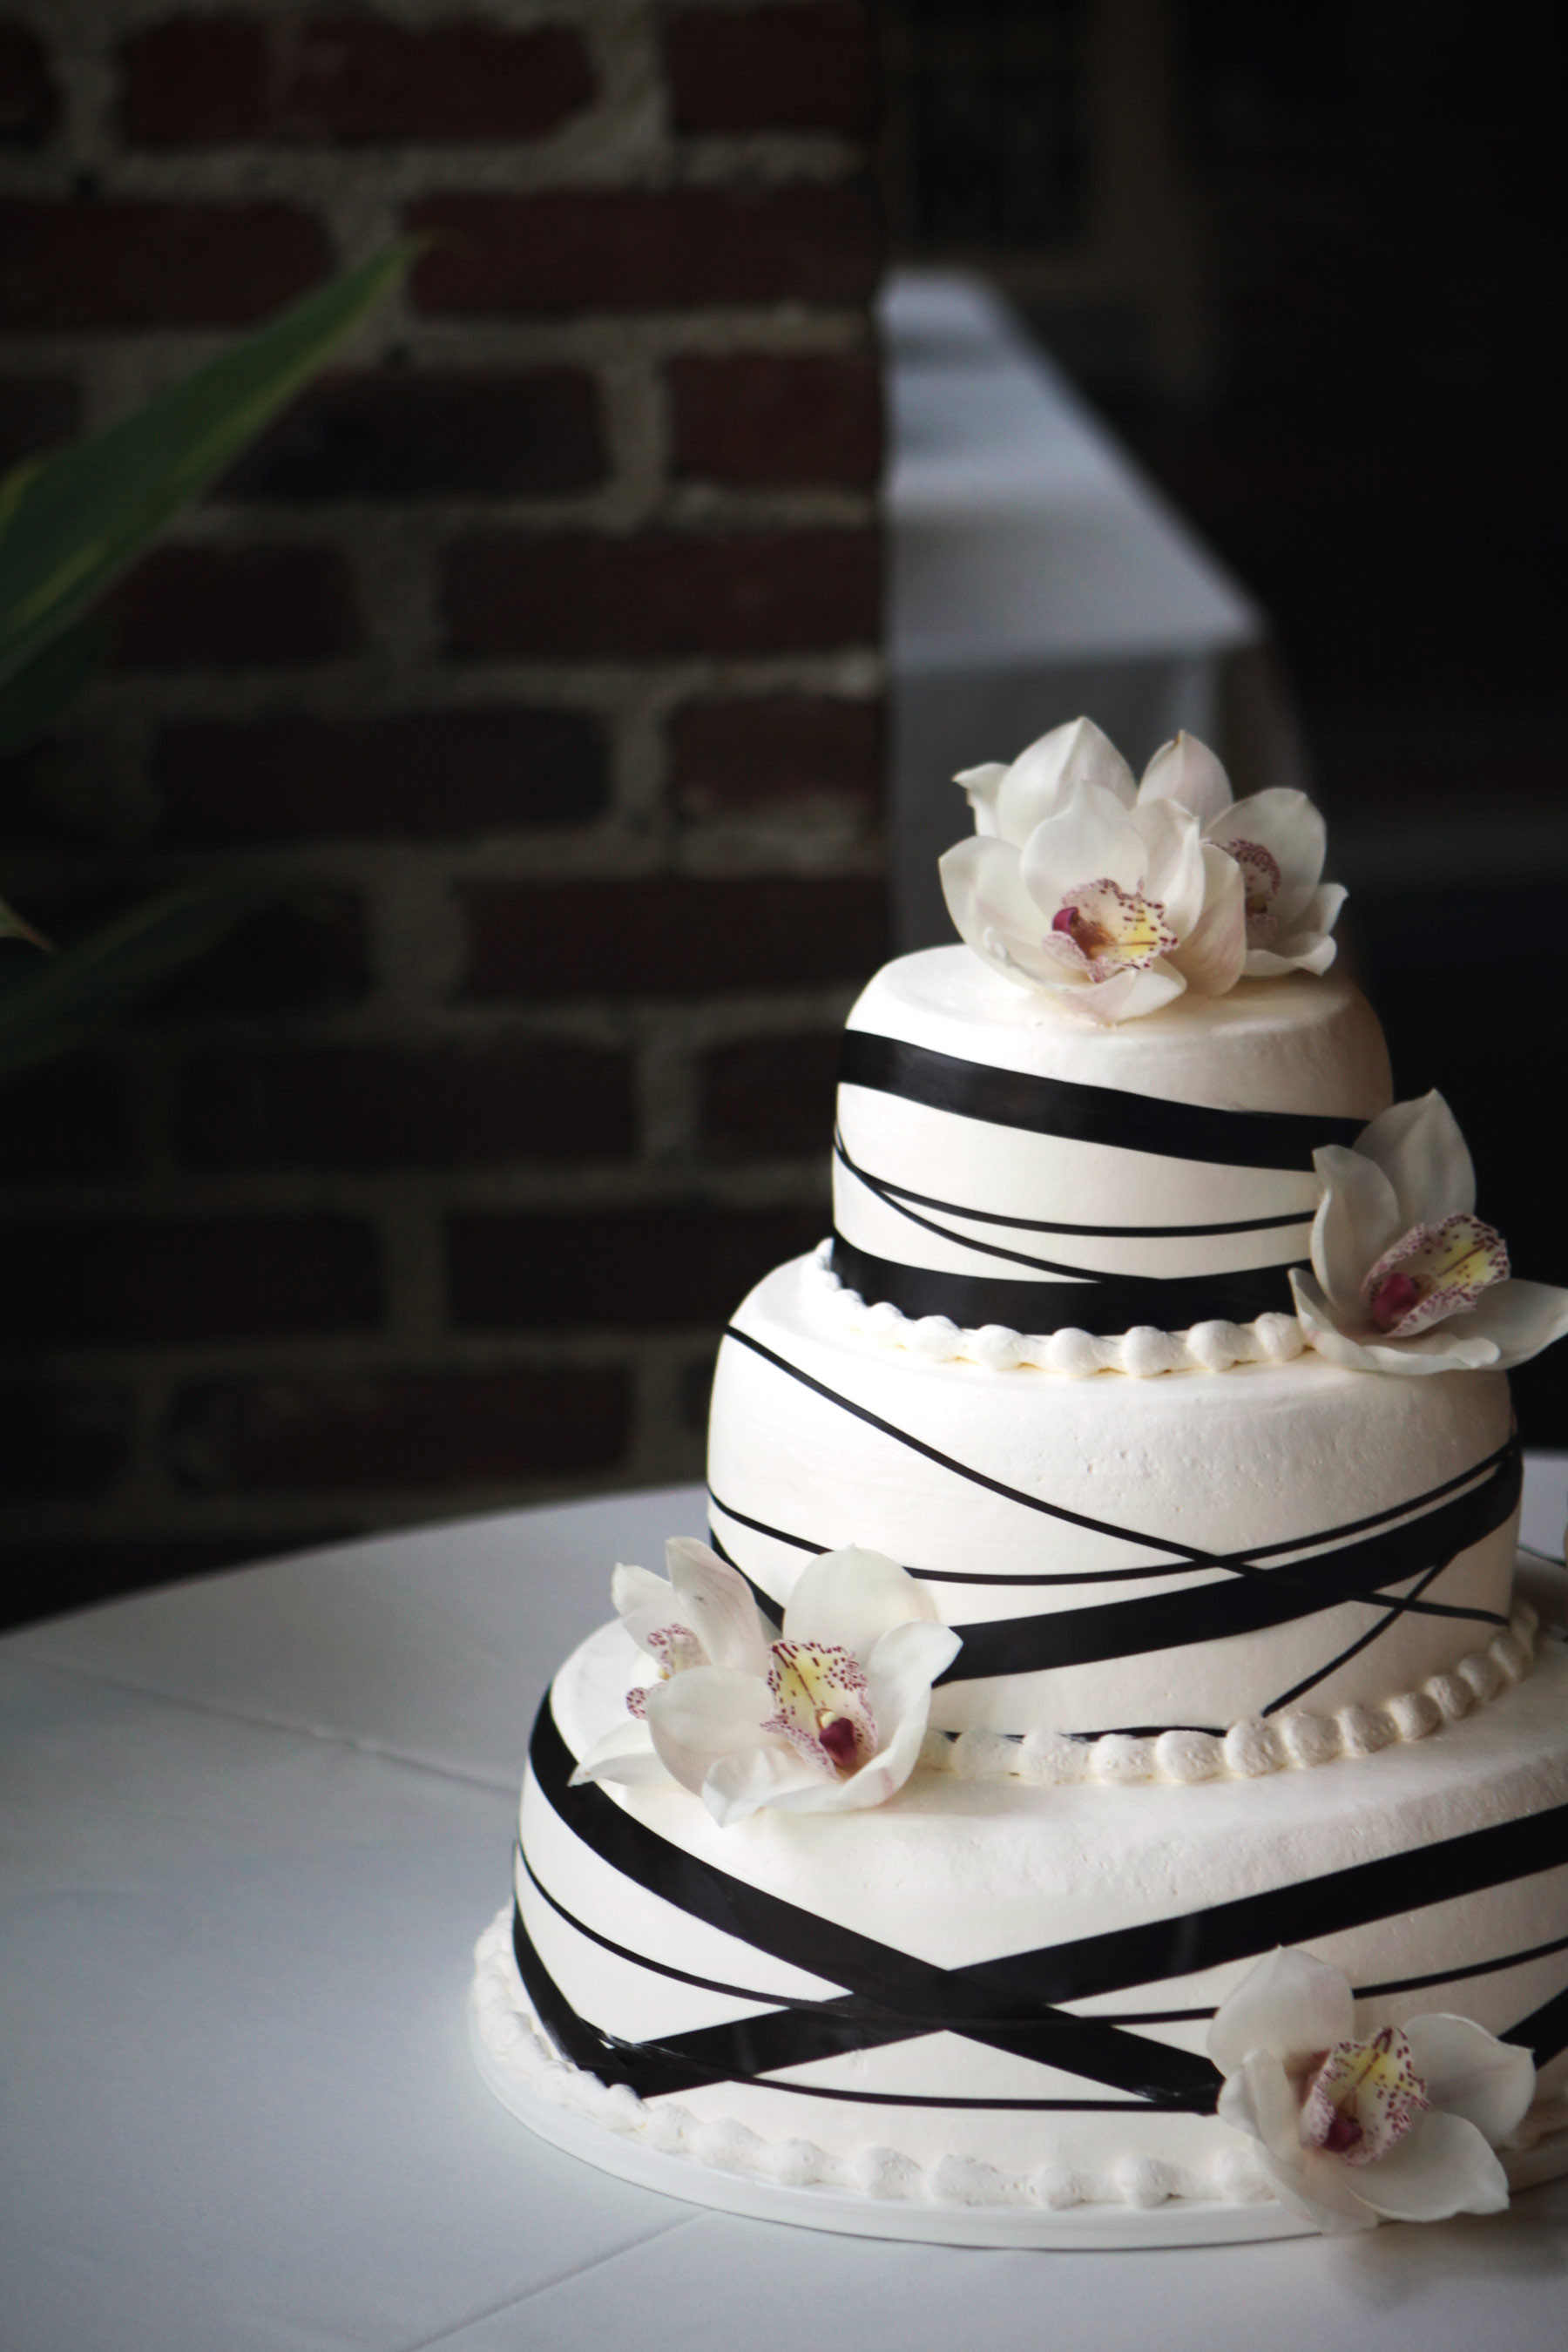 Ribboned Wedding Cakes the Best Ideas for Beautiful Wedding Cake Archives Patty S Cakes and